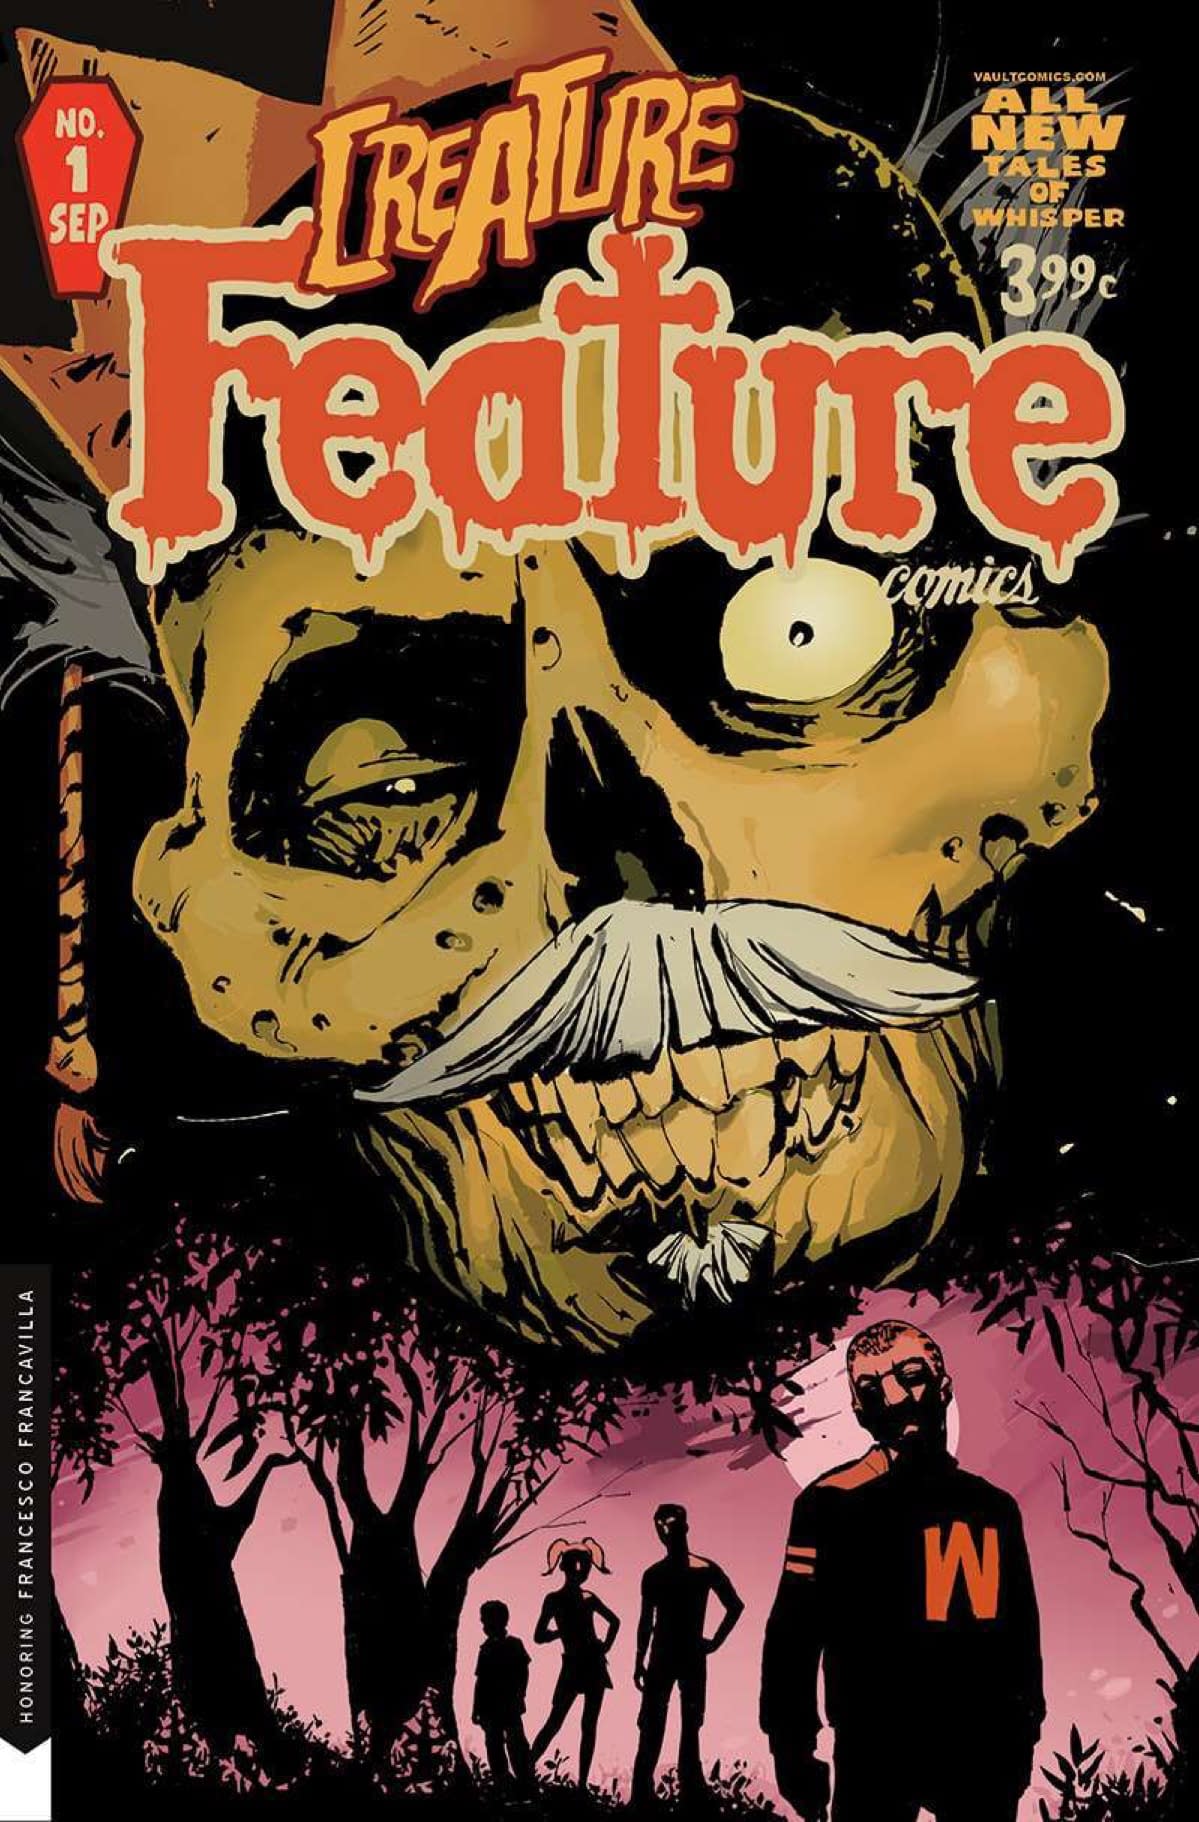 Creature Feature: Vault Comics Follows up Cult Classic With New Mini